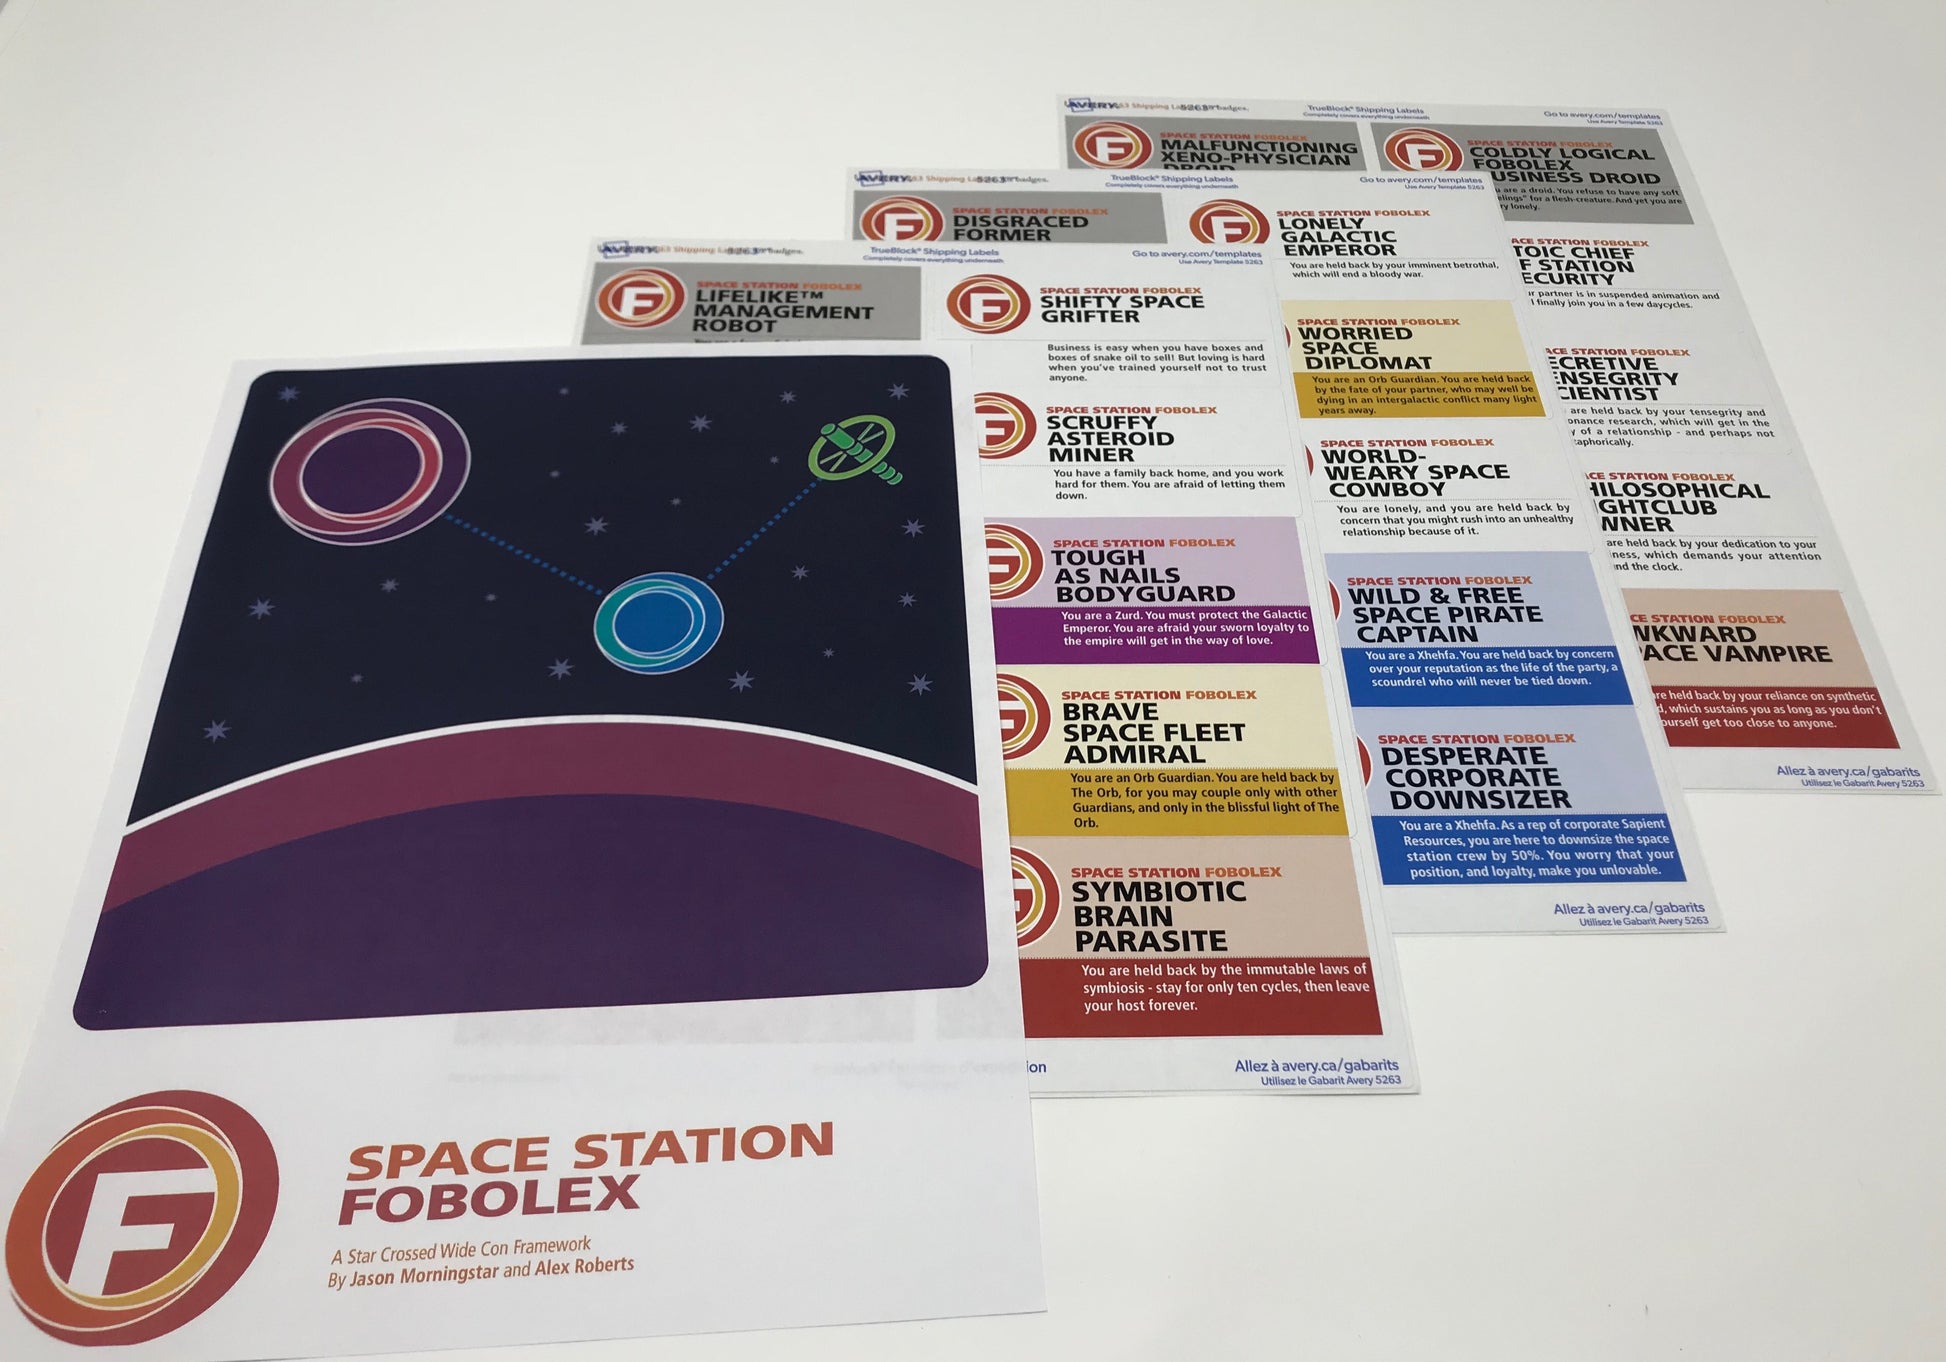 The printed materials for Space Station Fobolex, a set of rules that allows you to play Star Crossed with up to 20 players